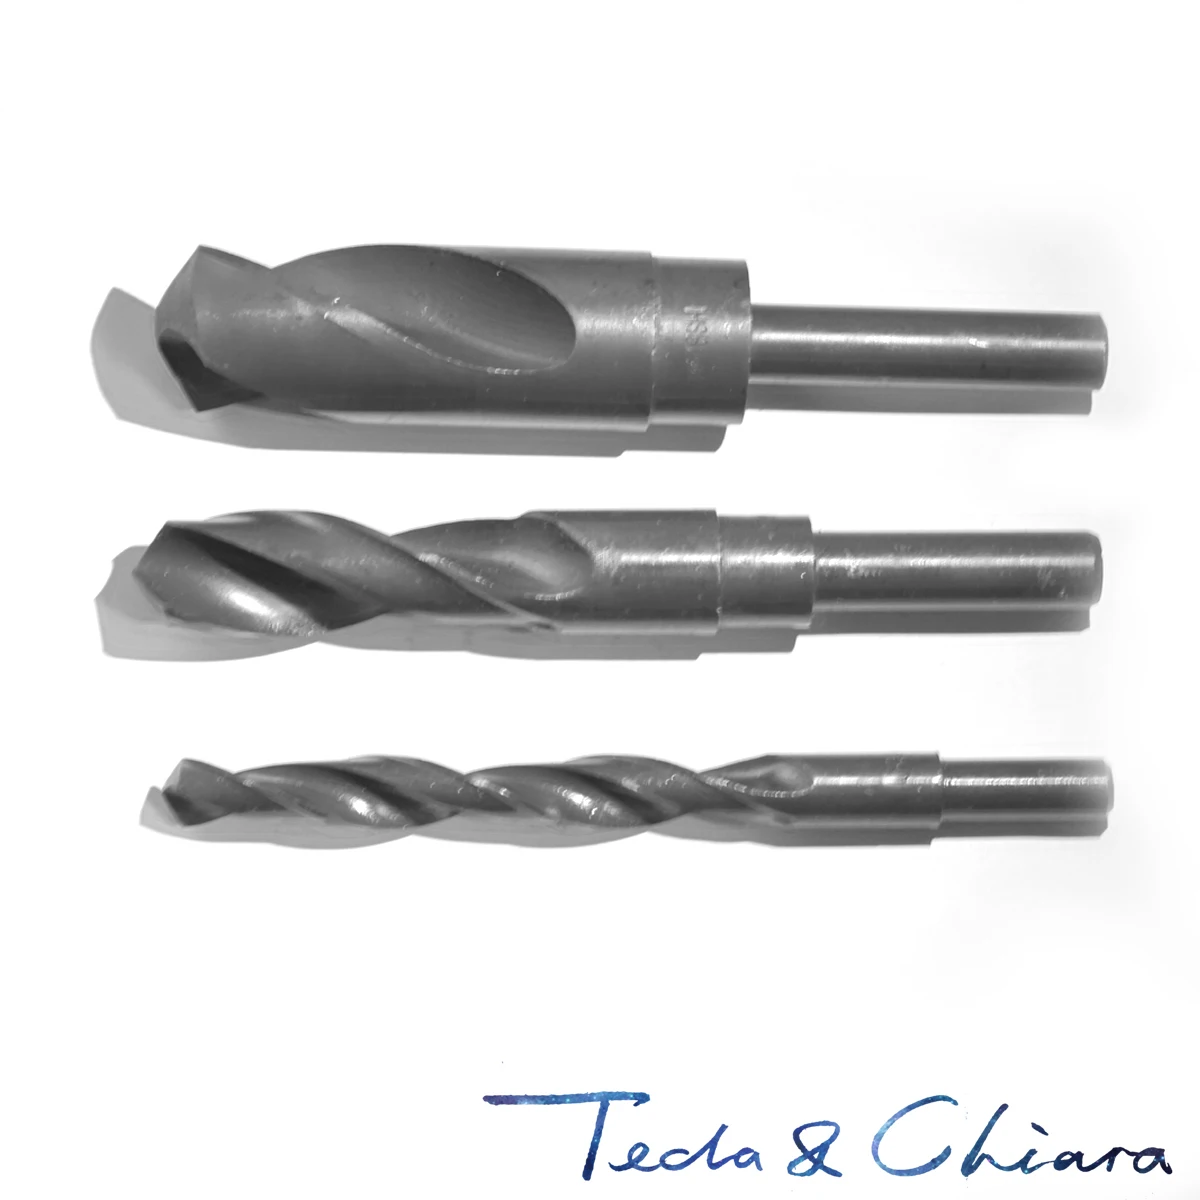 Details about   5.7 mm HSS Drill Bits. 